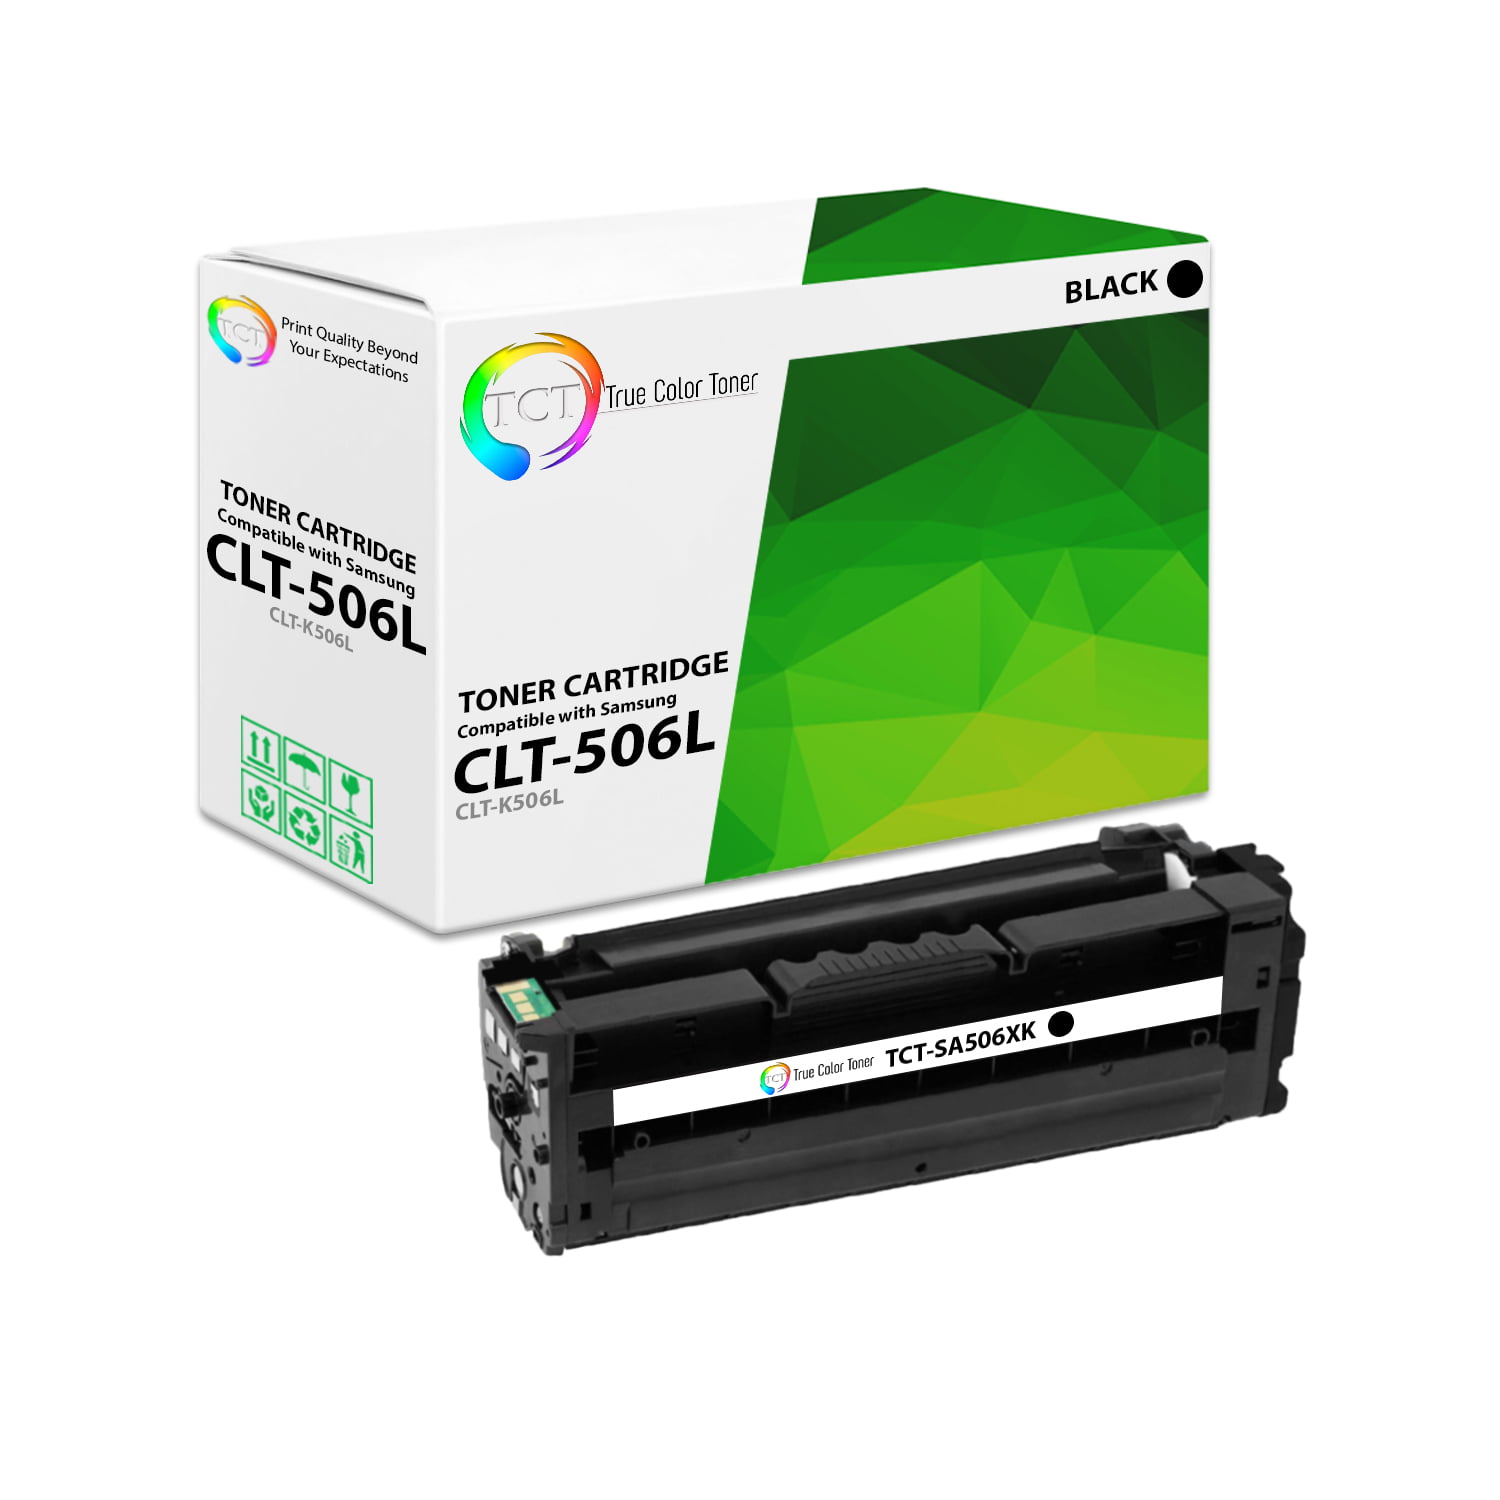 Breddegrad Busk Alle slags TCT Compatible High Yield Toner Cartridge Replacement for the Samsung CLT-506L  Series - 1 Pack Cyan - Walmart.com